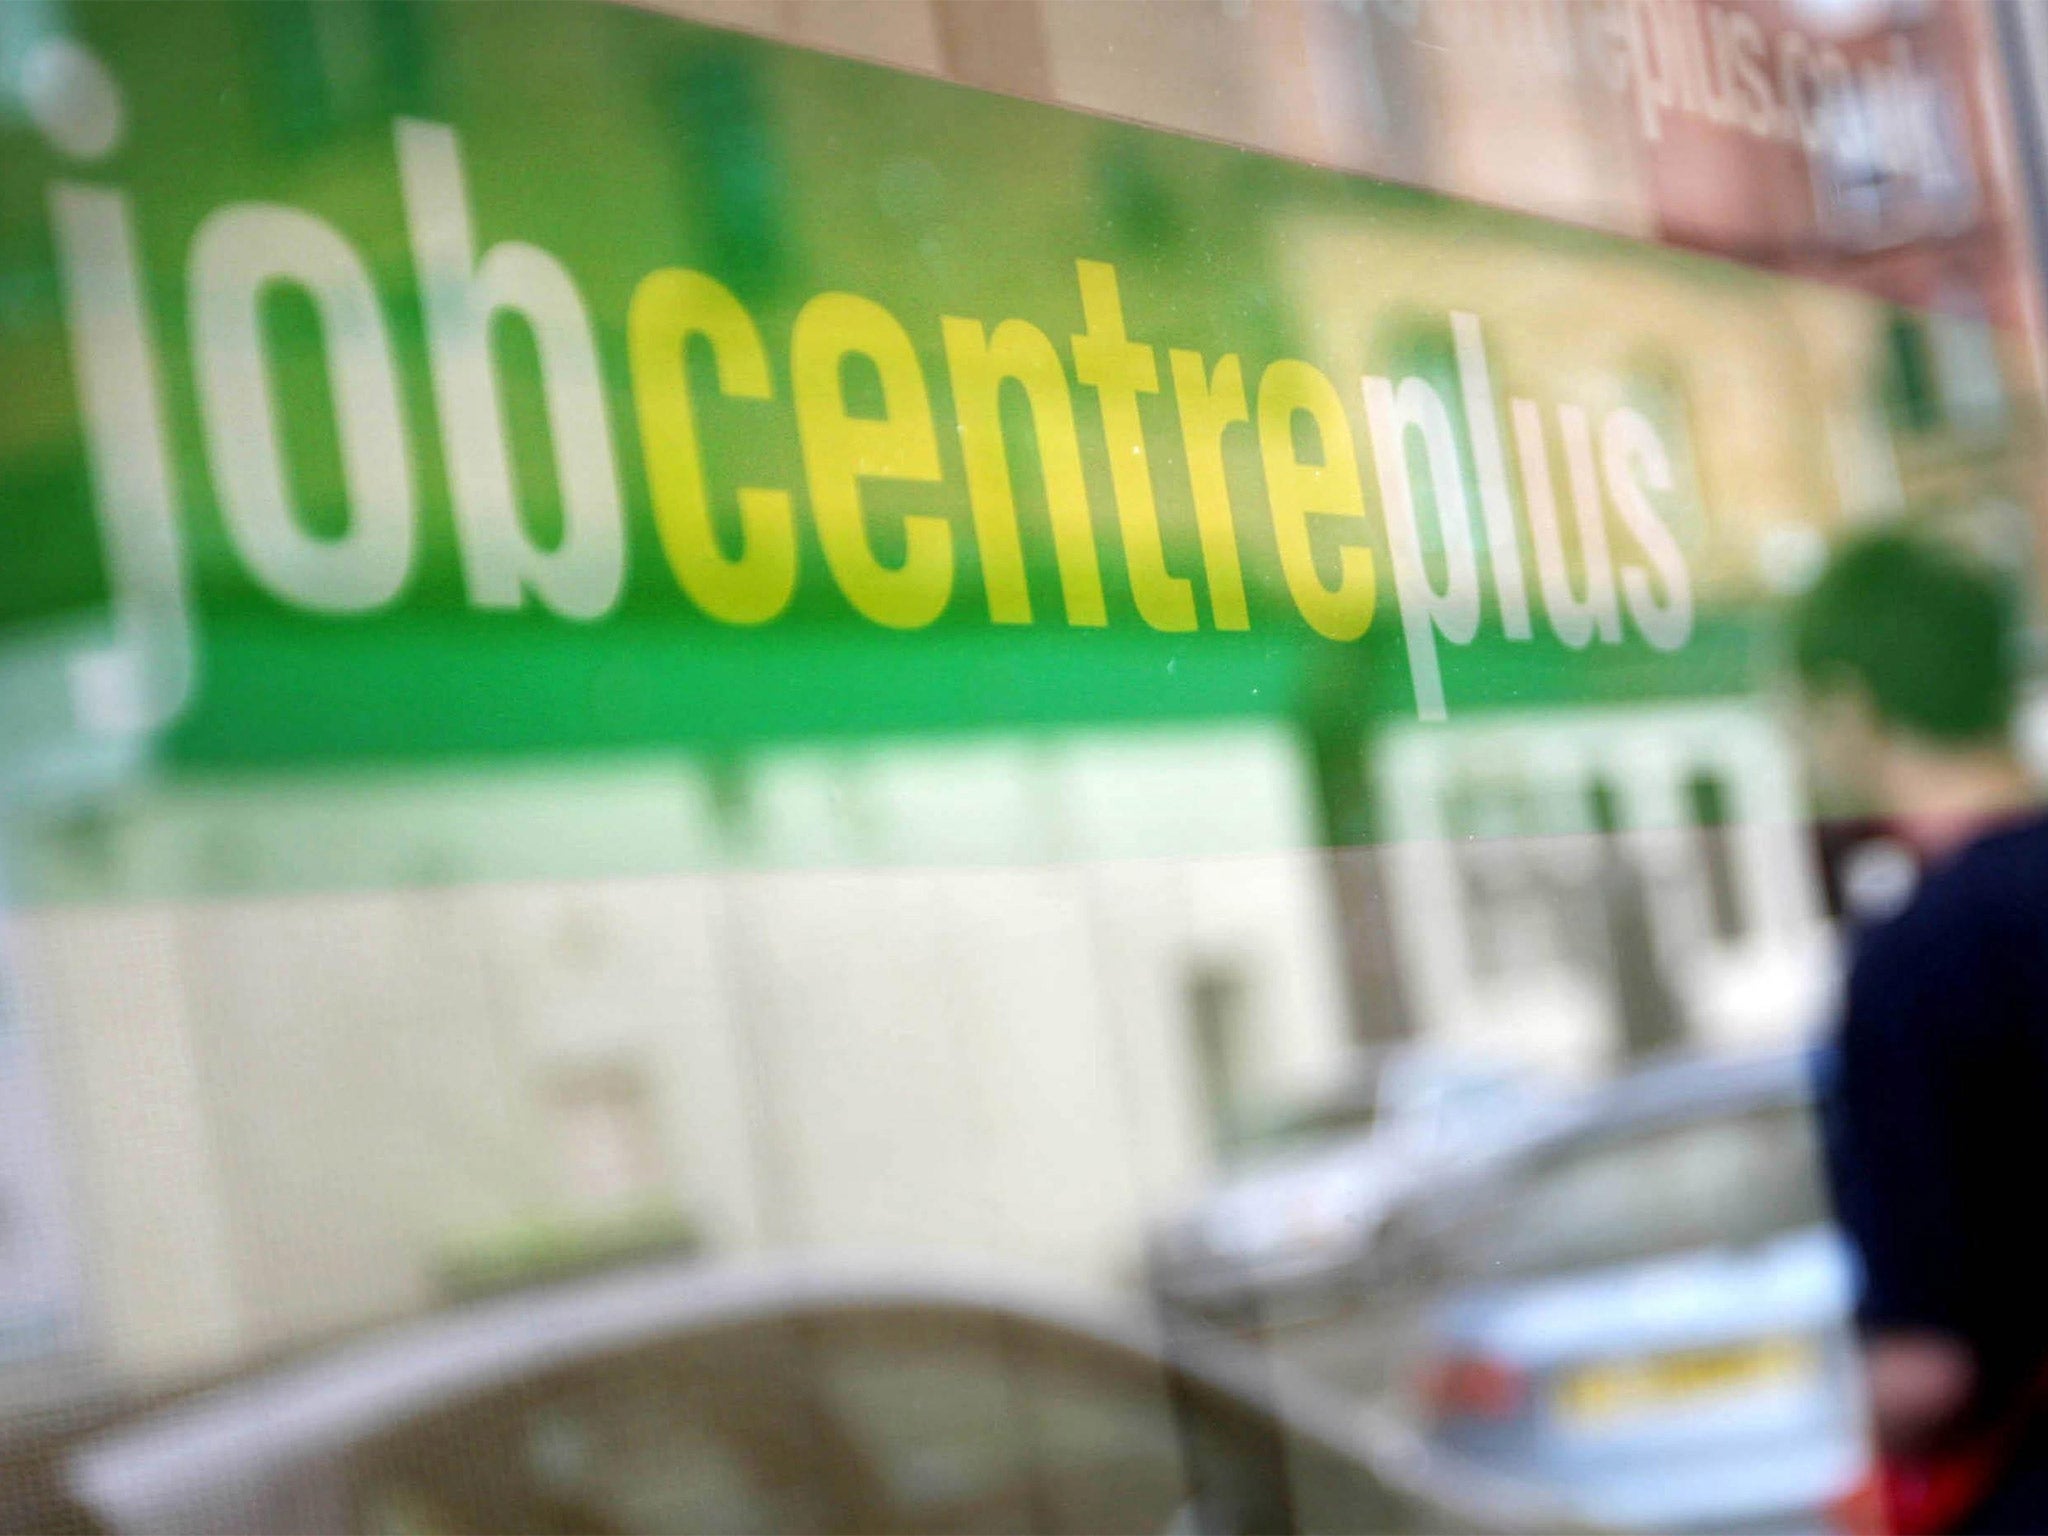 817,000 people aged 16-24 were looking for work in the quarter to May